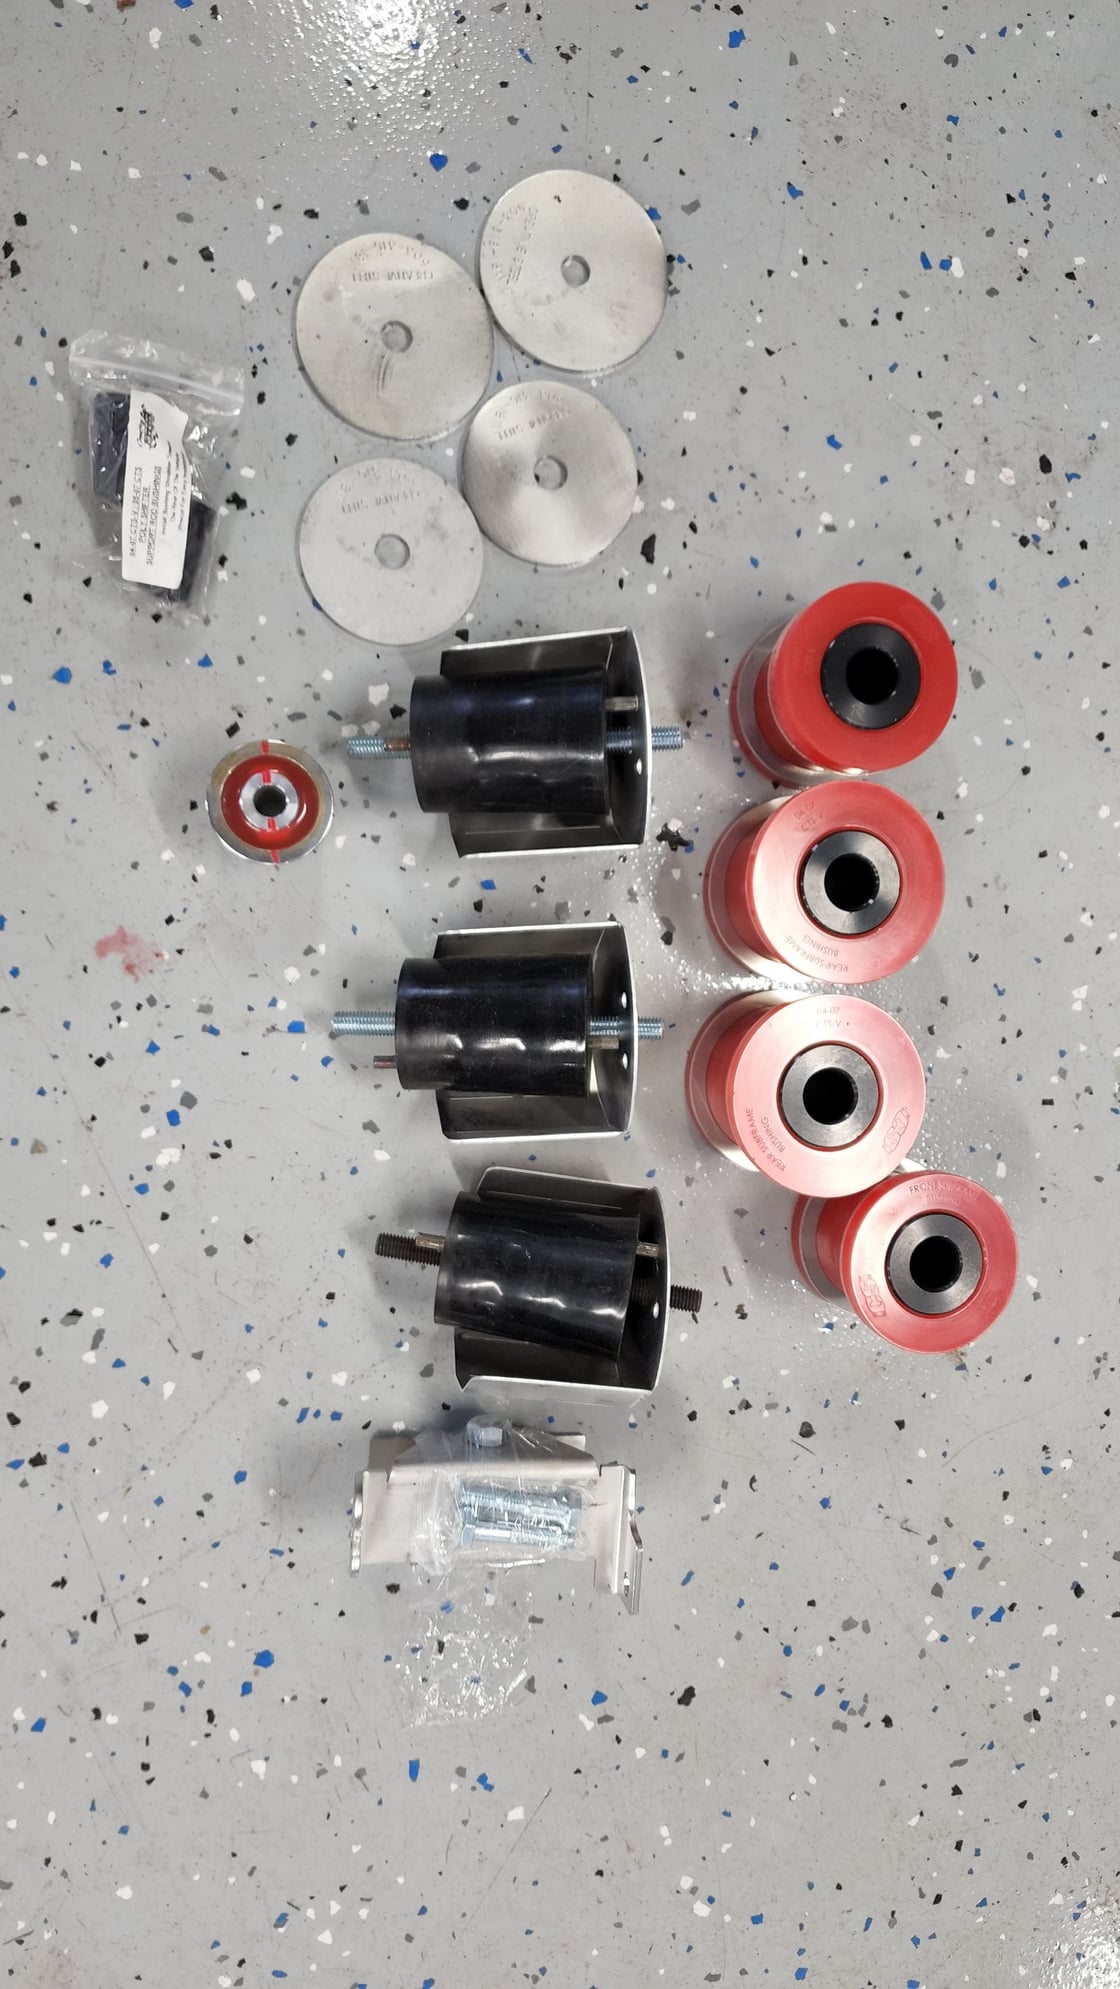 Drivetrain - Gen 1 04-07 CTS-V Creative Steel Bushings, motor mounts, Transmission Mount etc - New - 2004 to 2007 Cadillac CTS-V - Greenland, NH 03840, United States